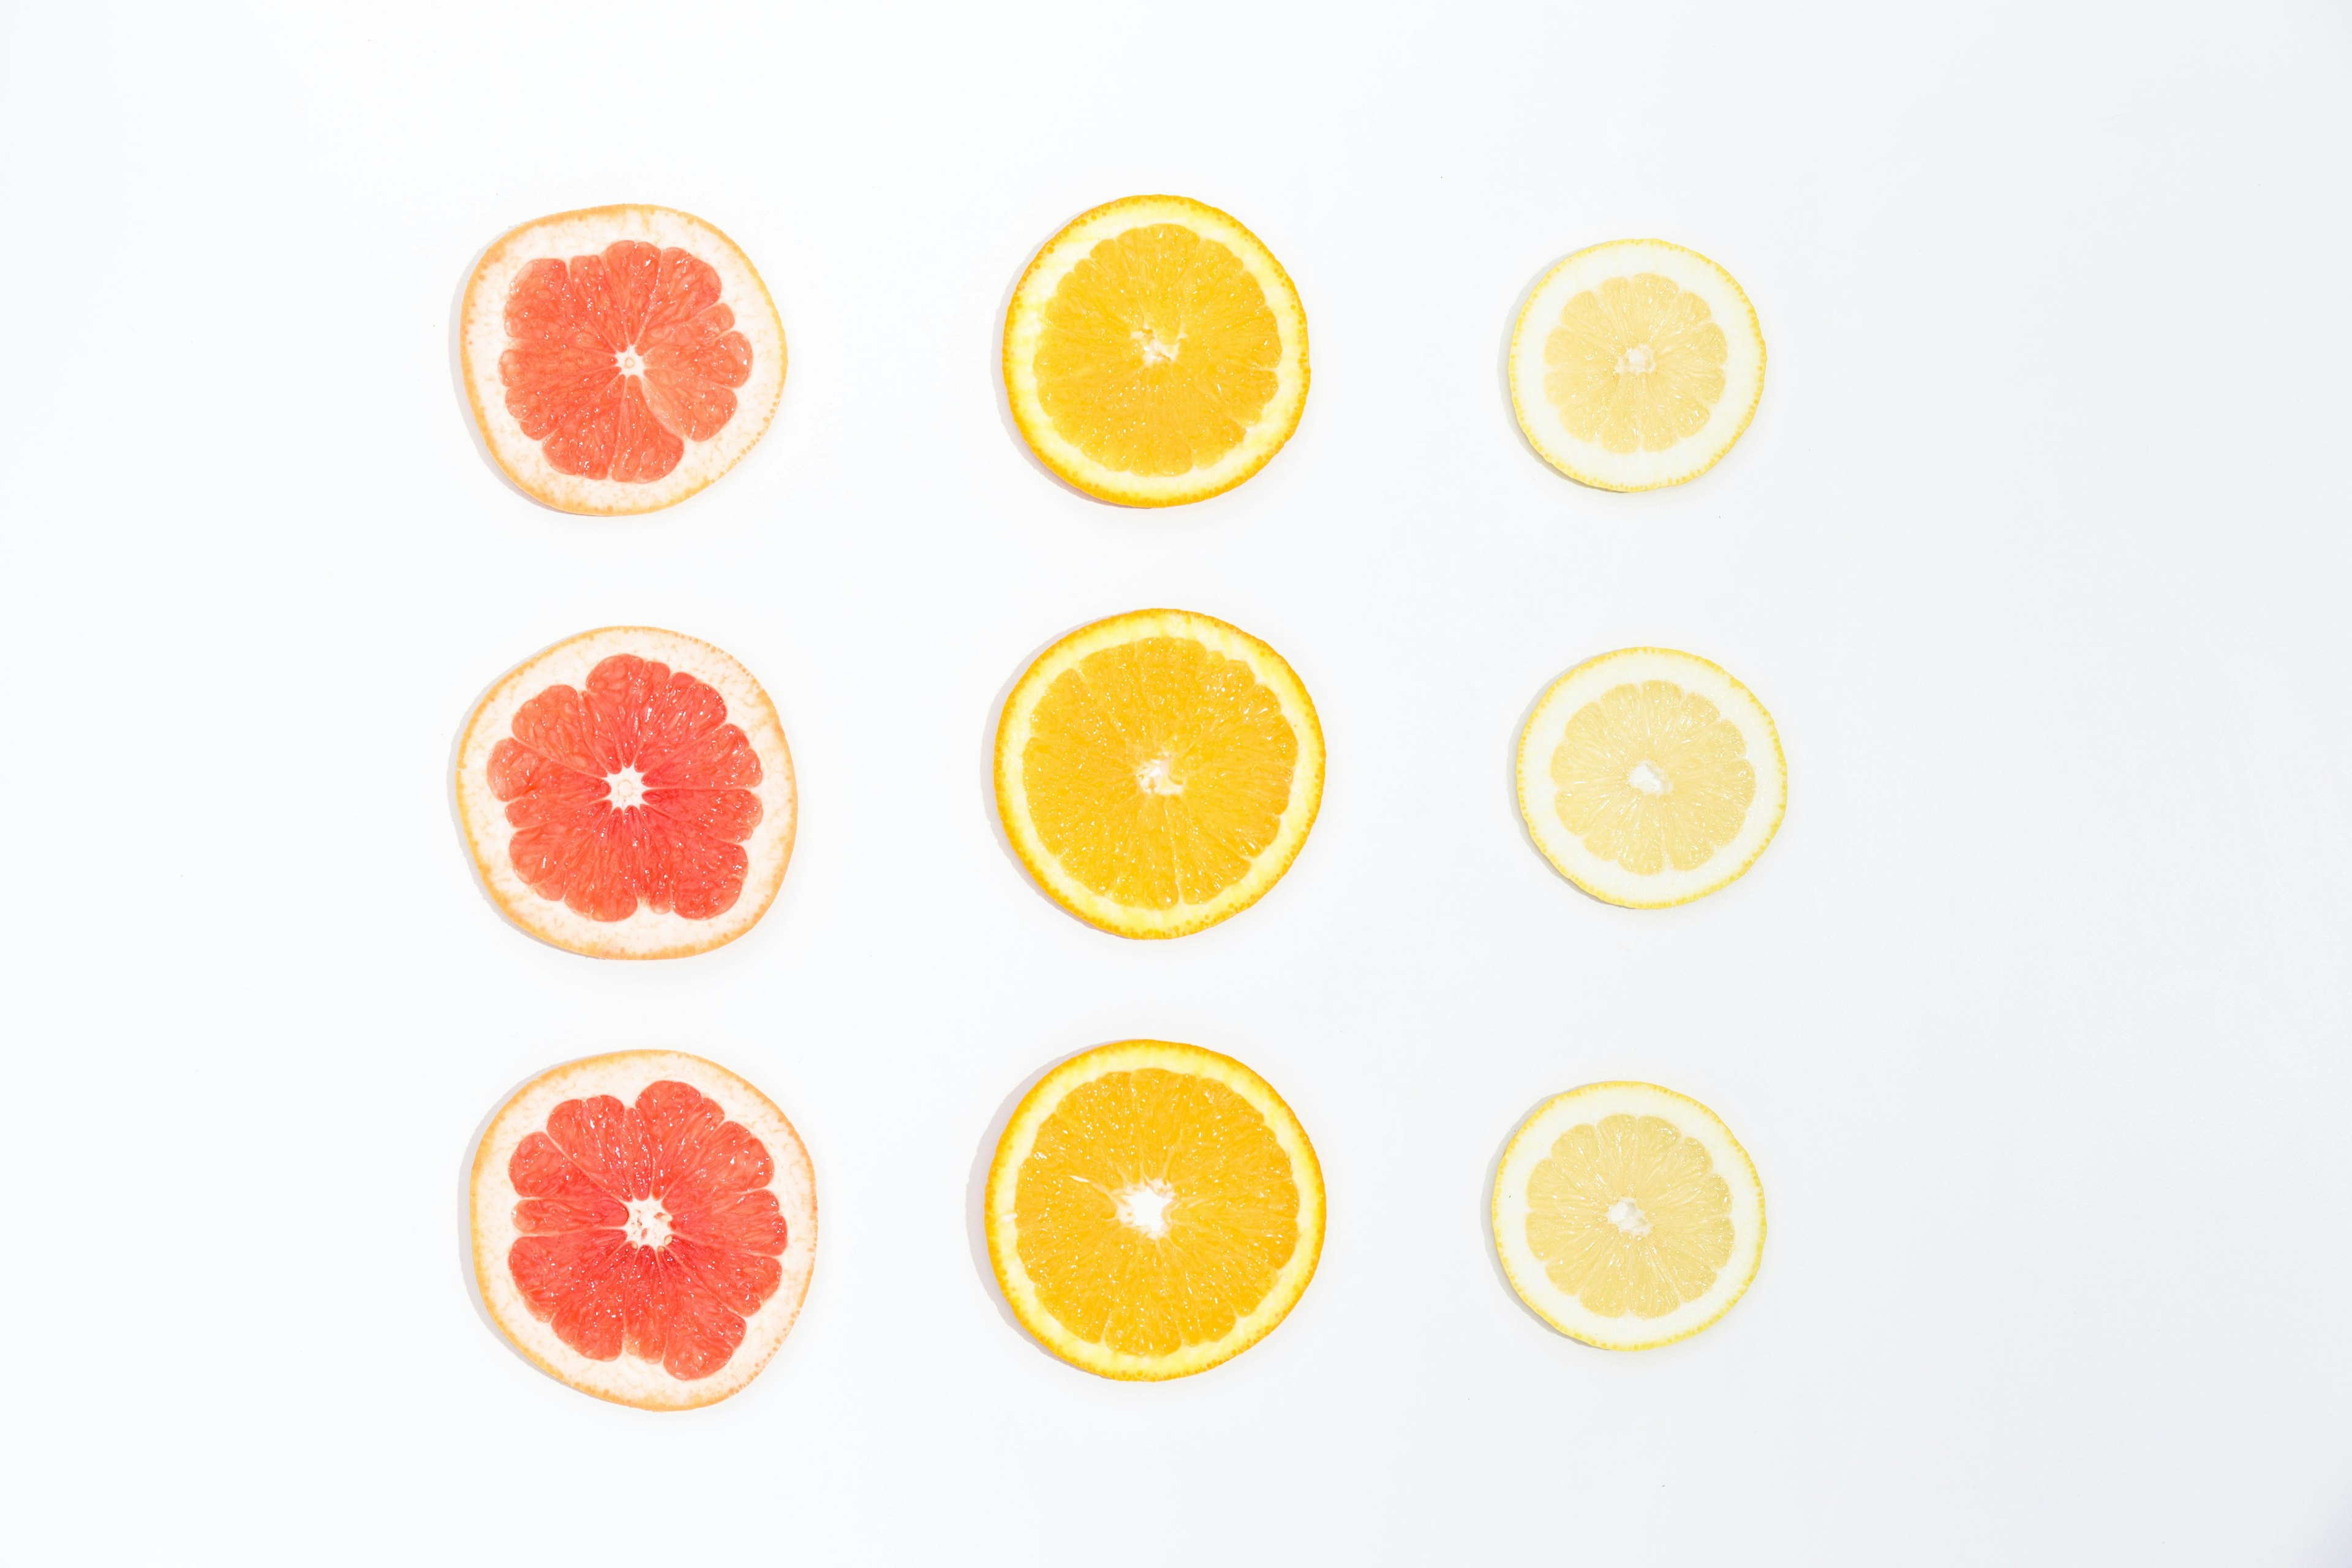 nine slices of citrus fruits arranged in rows against a white background